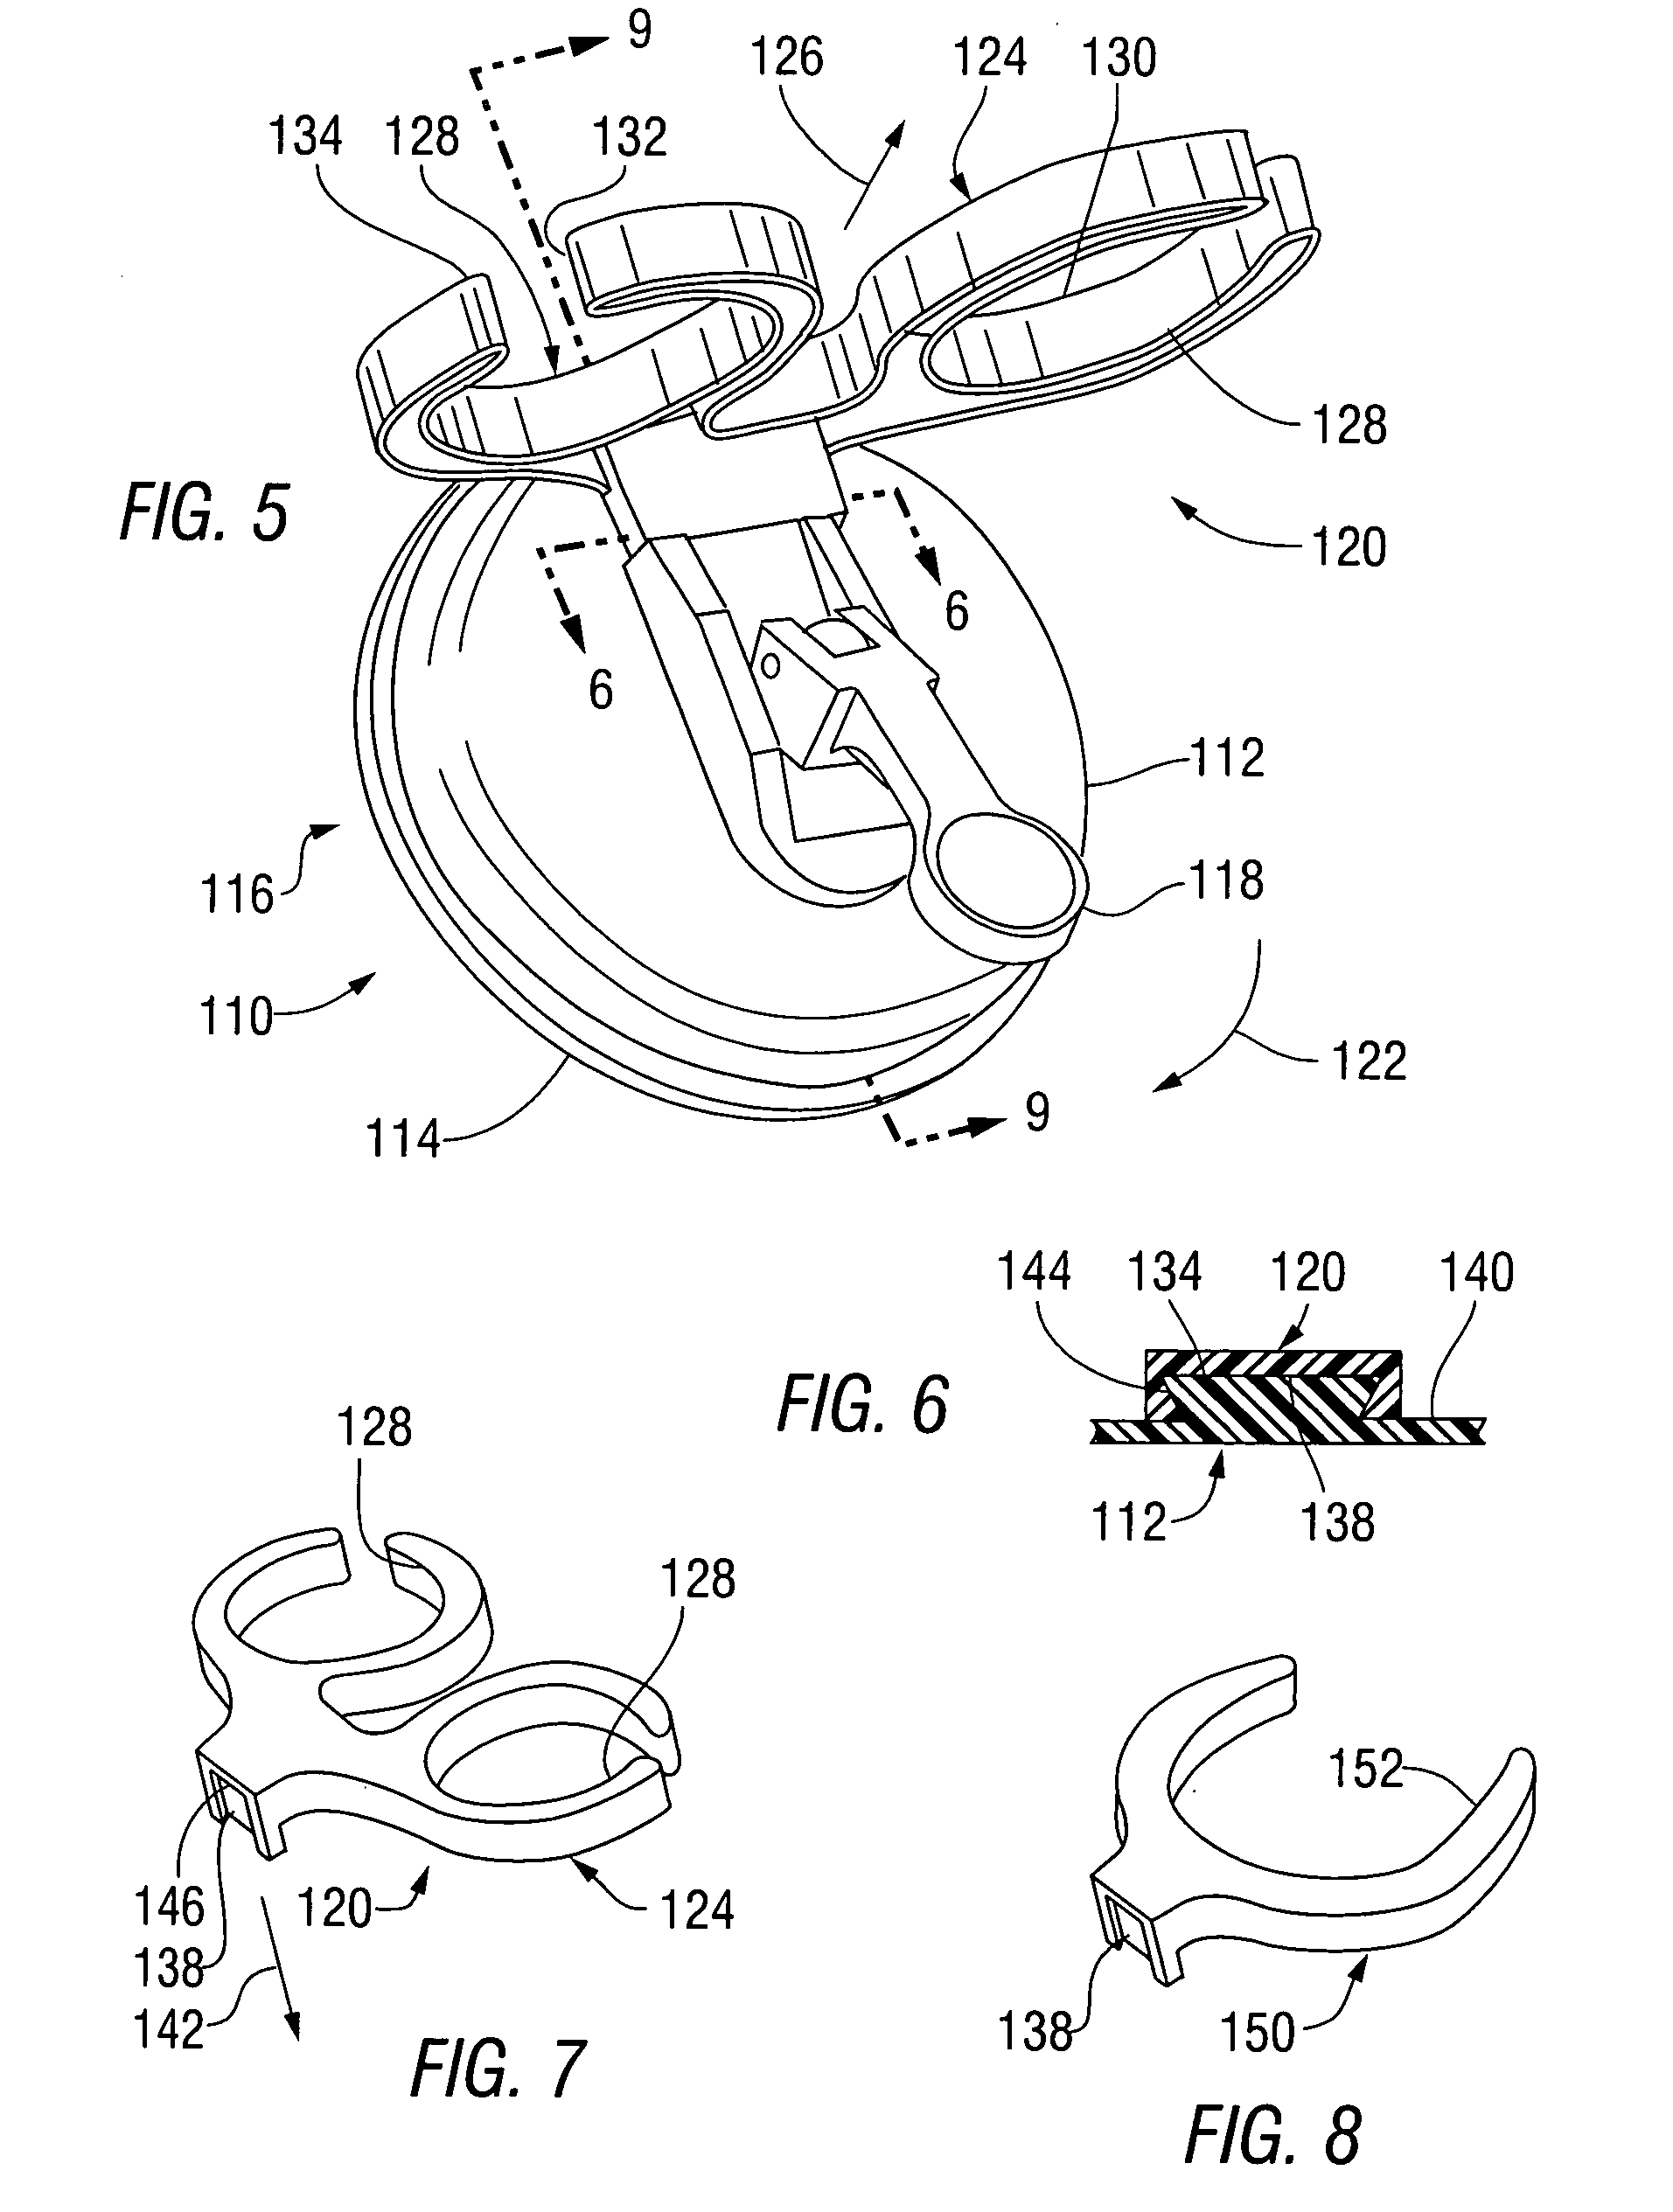 Suction cup apparatus for attachment to porous and nonporous surfaces